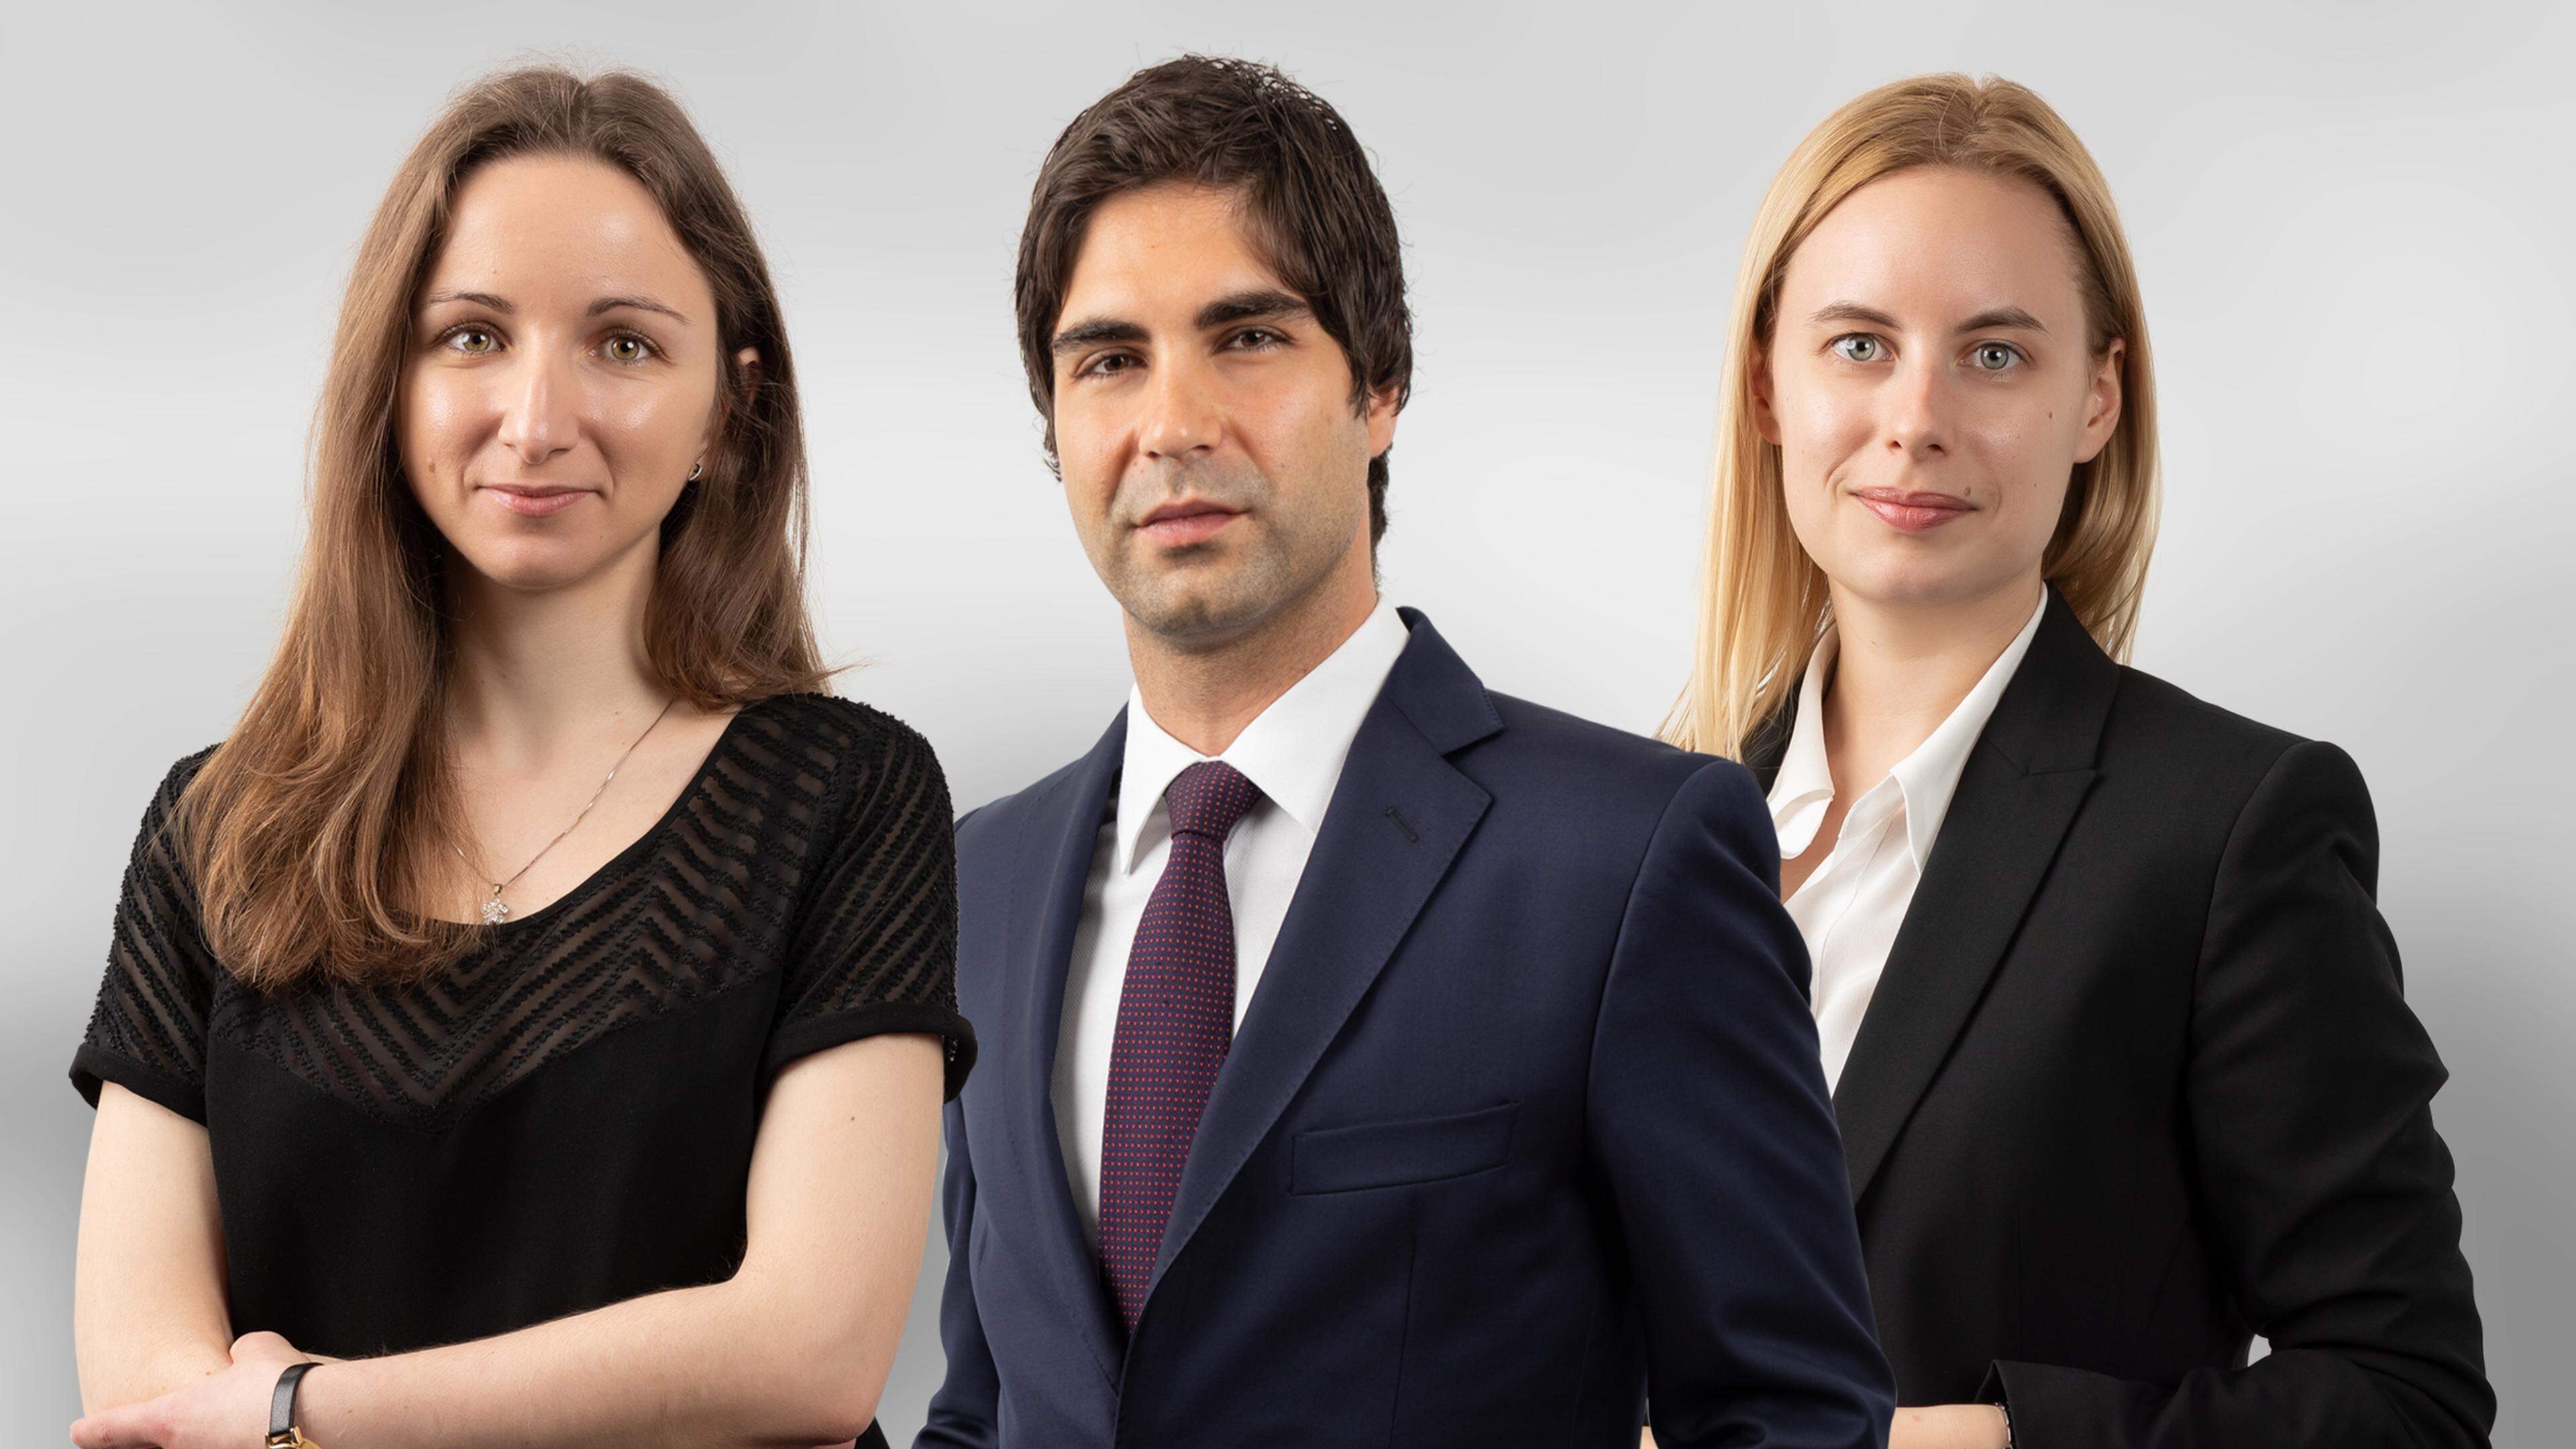 Boika Deleva, Antoine-David Freymann and Katharina Creutz, from left to right, have all been appointed counsel at Clifford Chance in Luxembourg